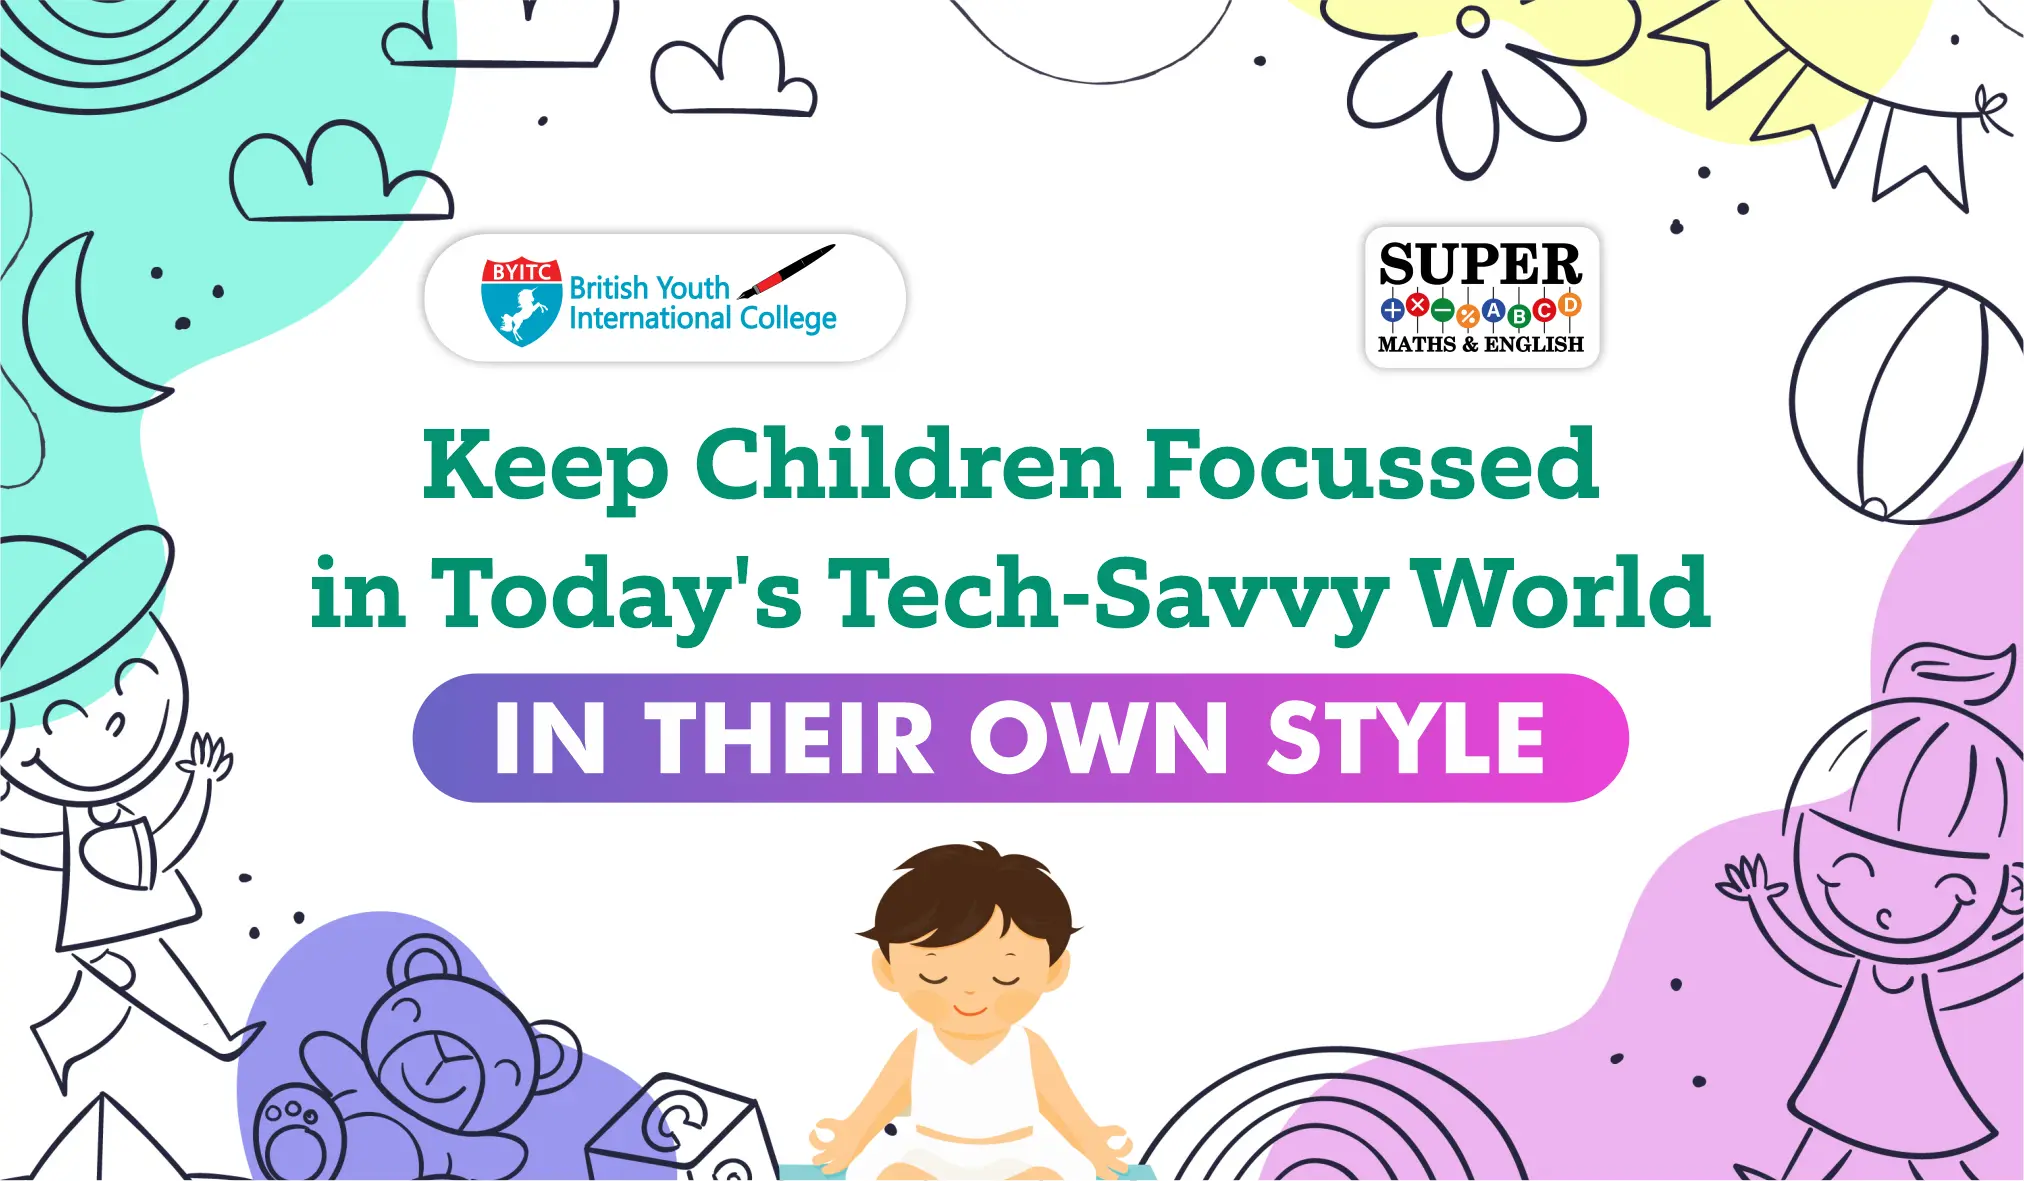 Keep children focussed in today’s tech-savvy world- in their own style